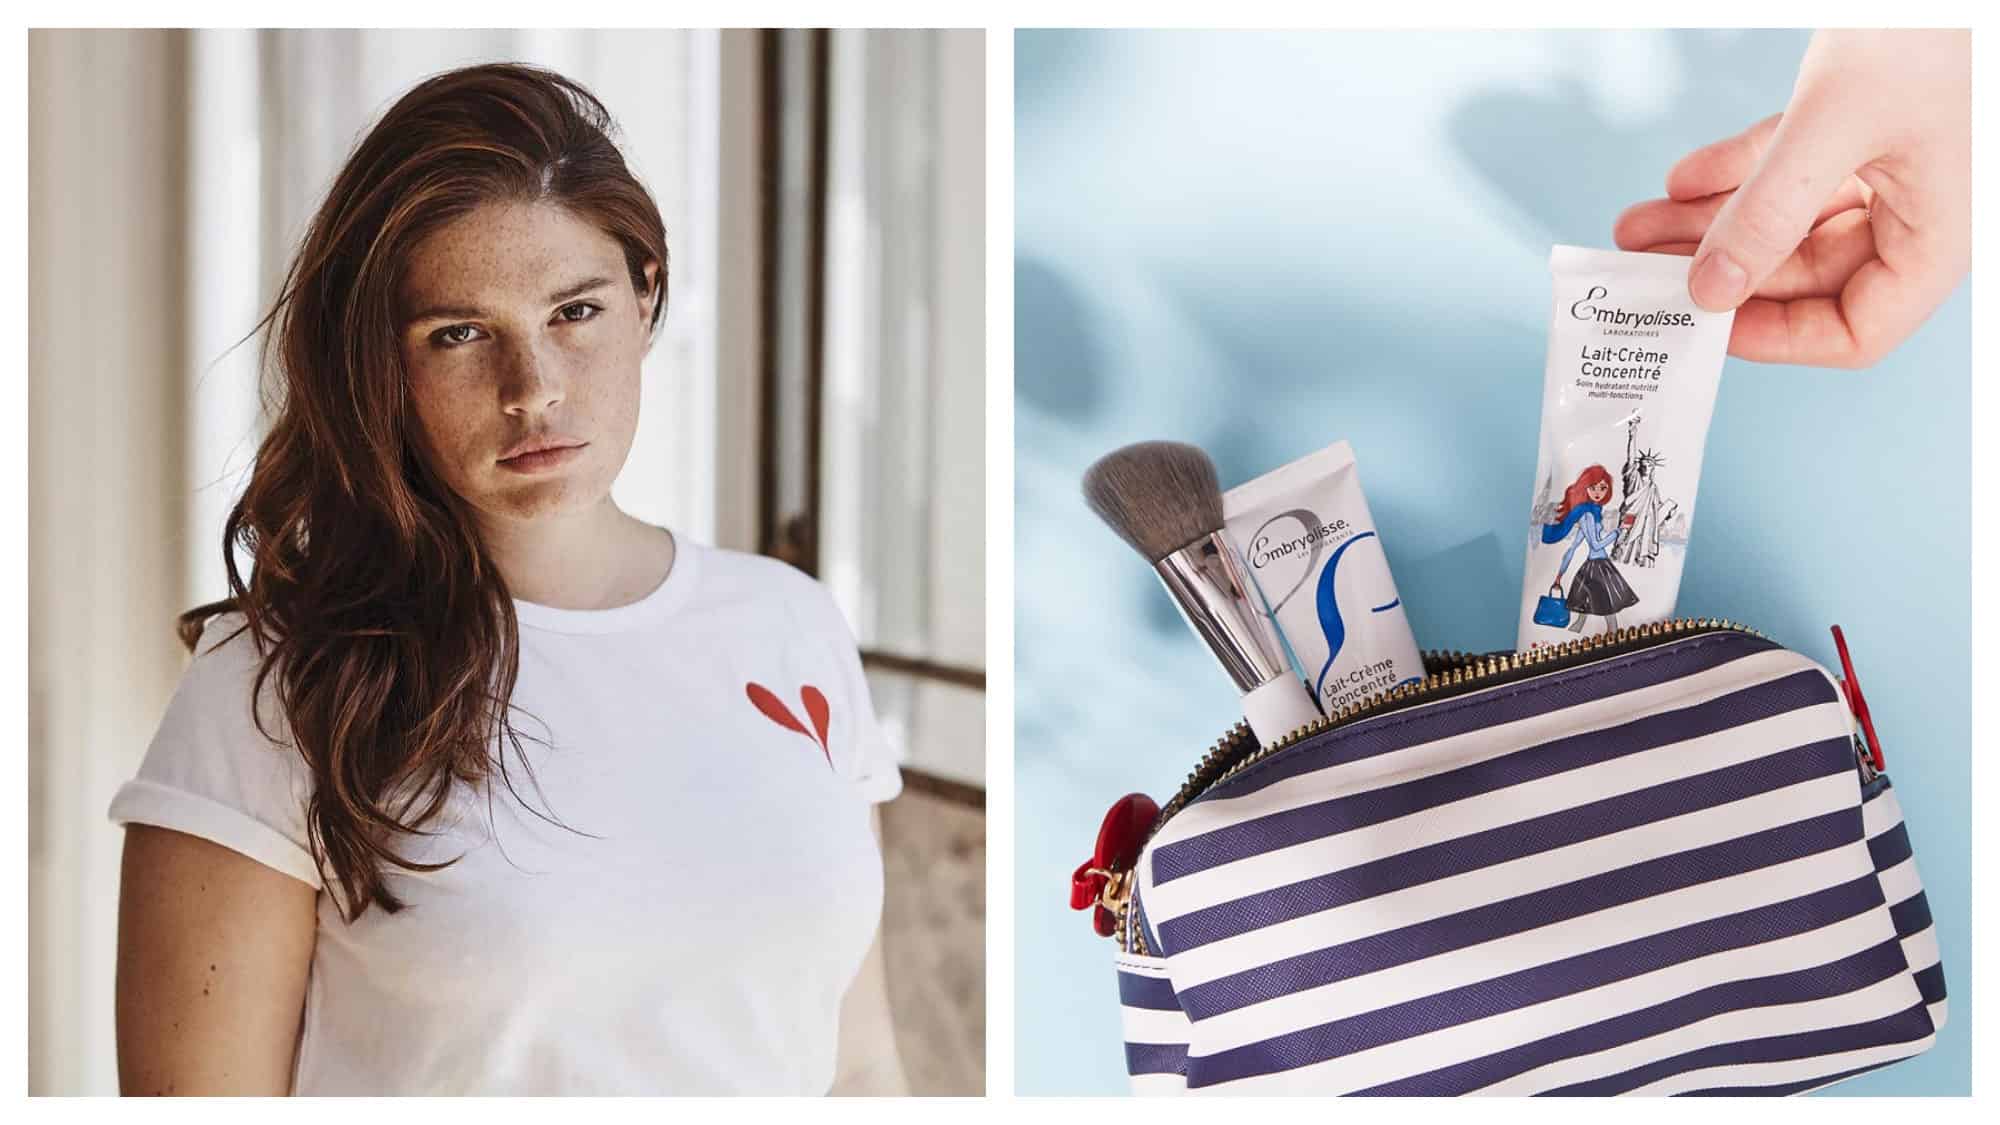 Girl with brown hair and white t-shirt with heart. Striped blue and white toiletry bag with makeup brush and Embryolisse cream